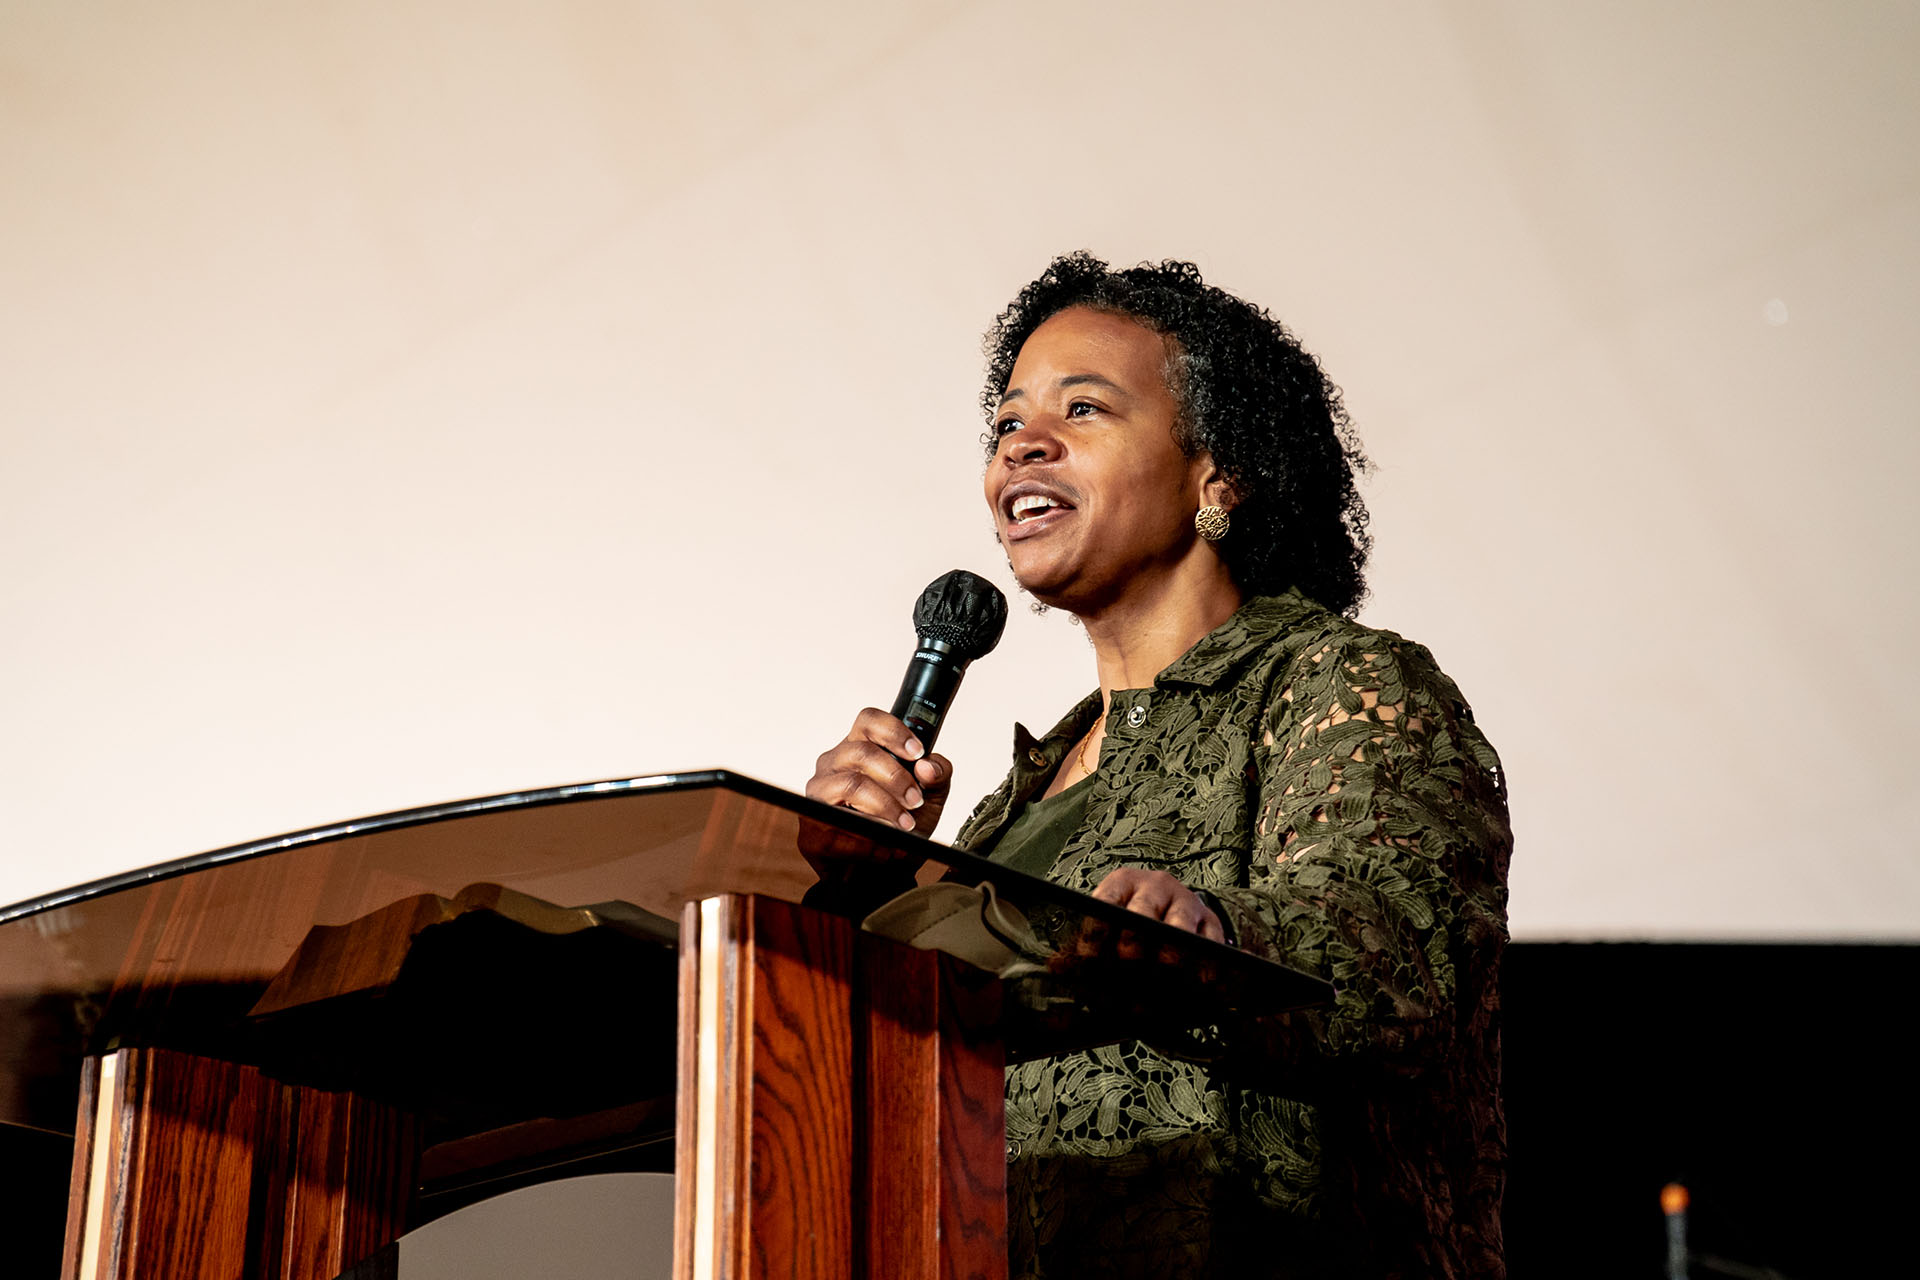 Speaking at Event | Dawn Mann Sanders | Christian Author and Motivational Speaker | Biblical Relationship Advice